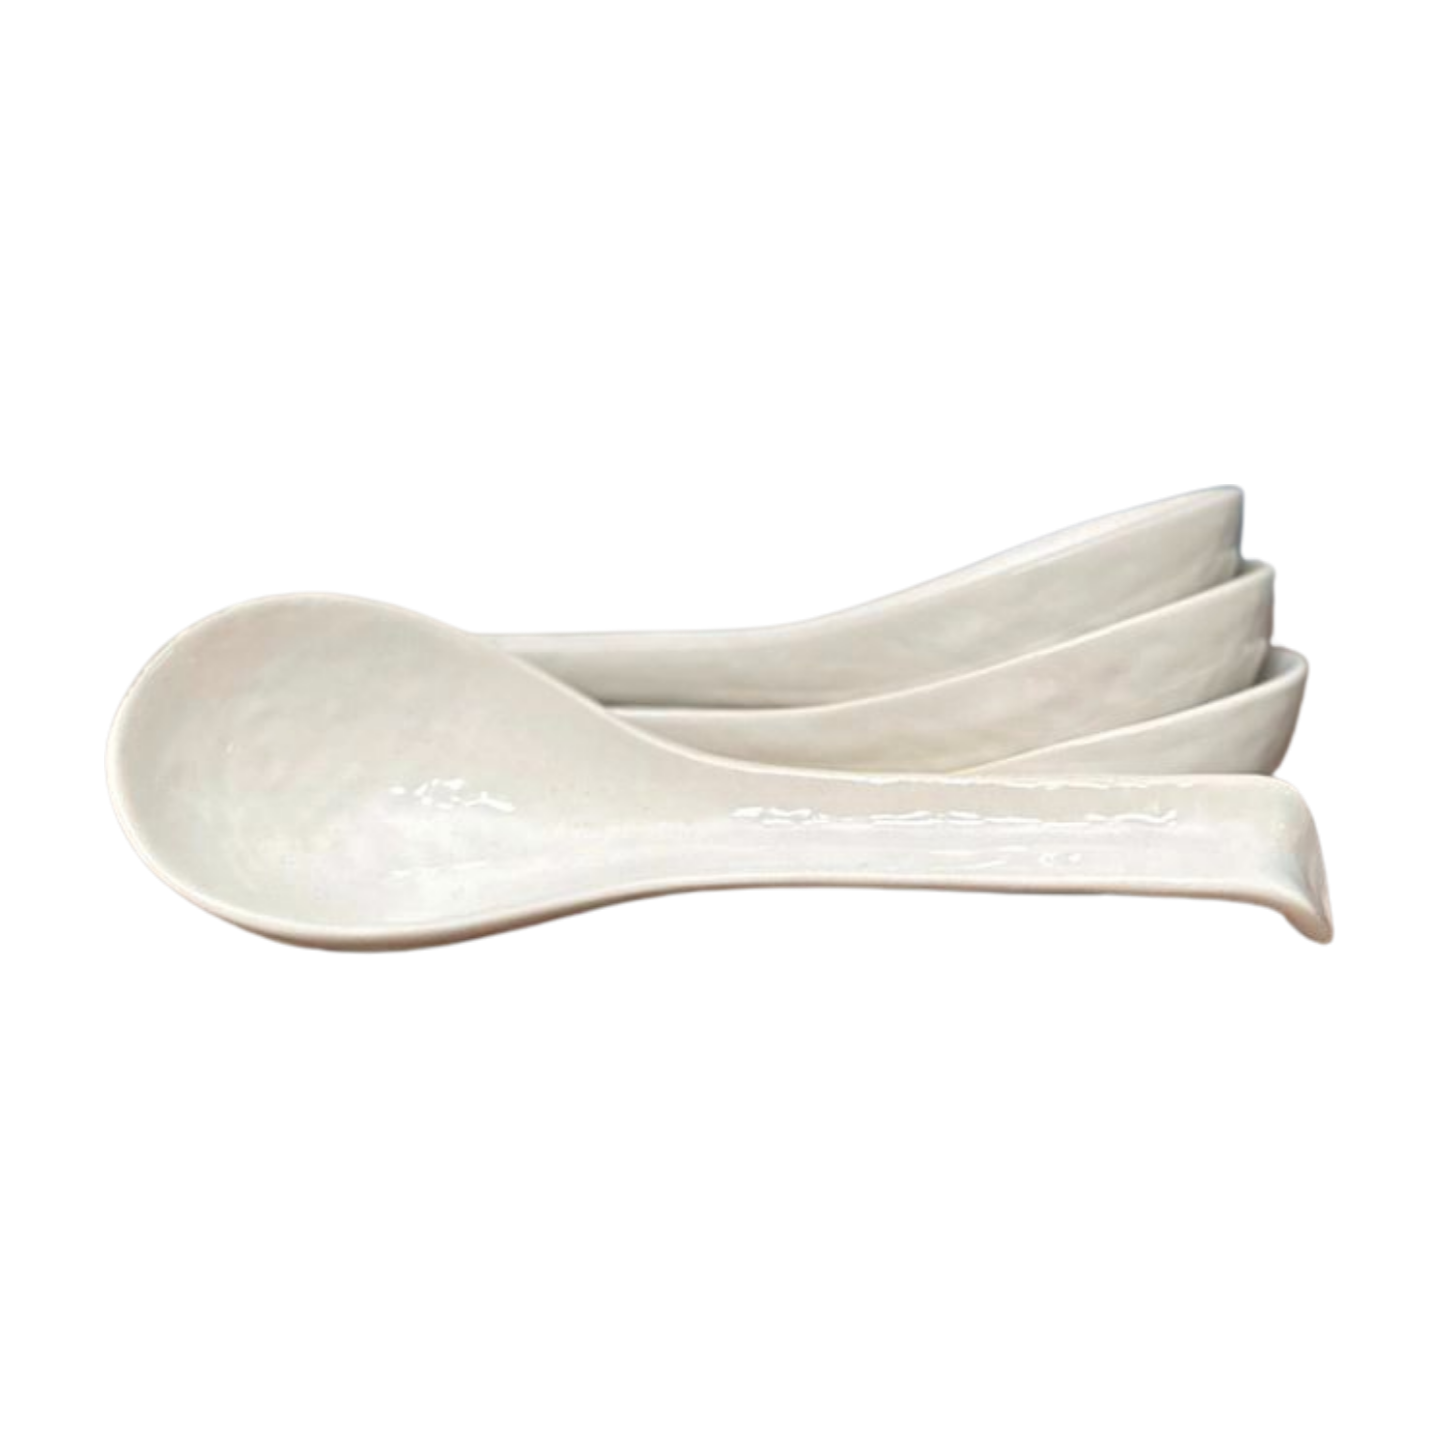 Set of stacked Japanese Soup Spoons in white.